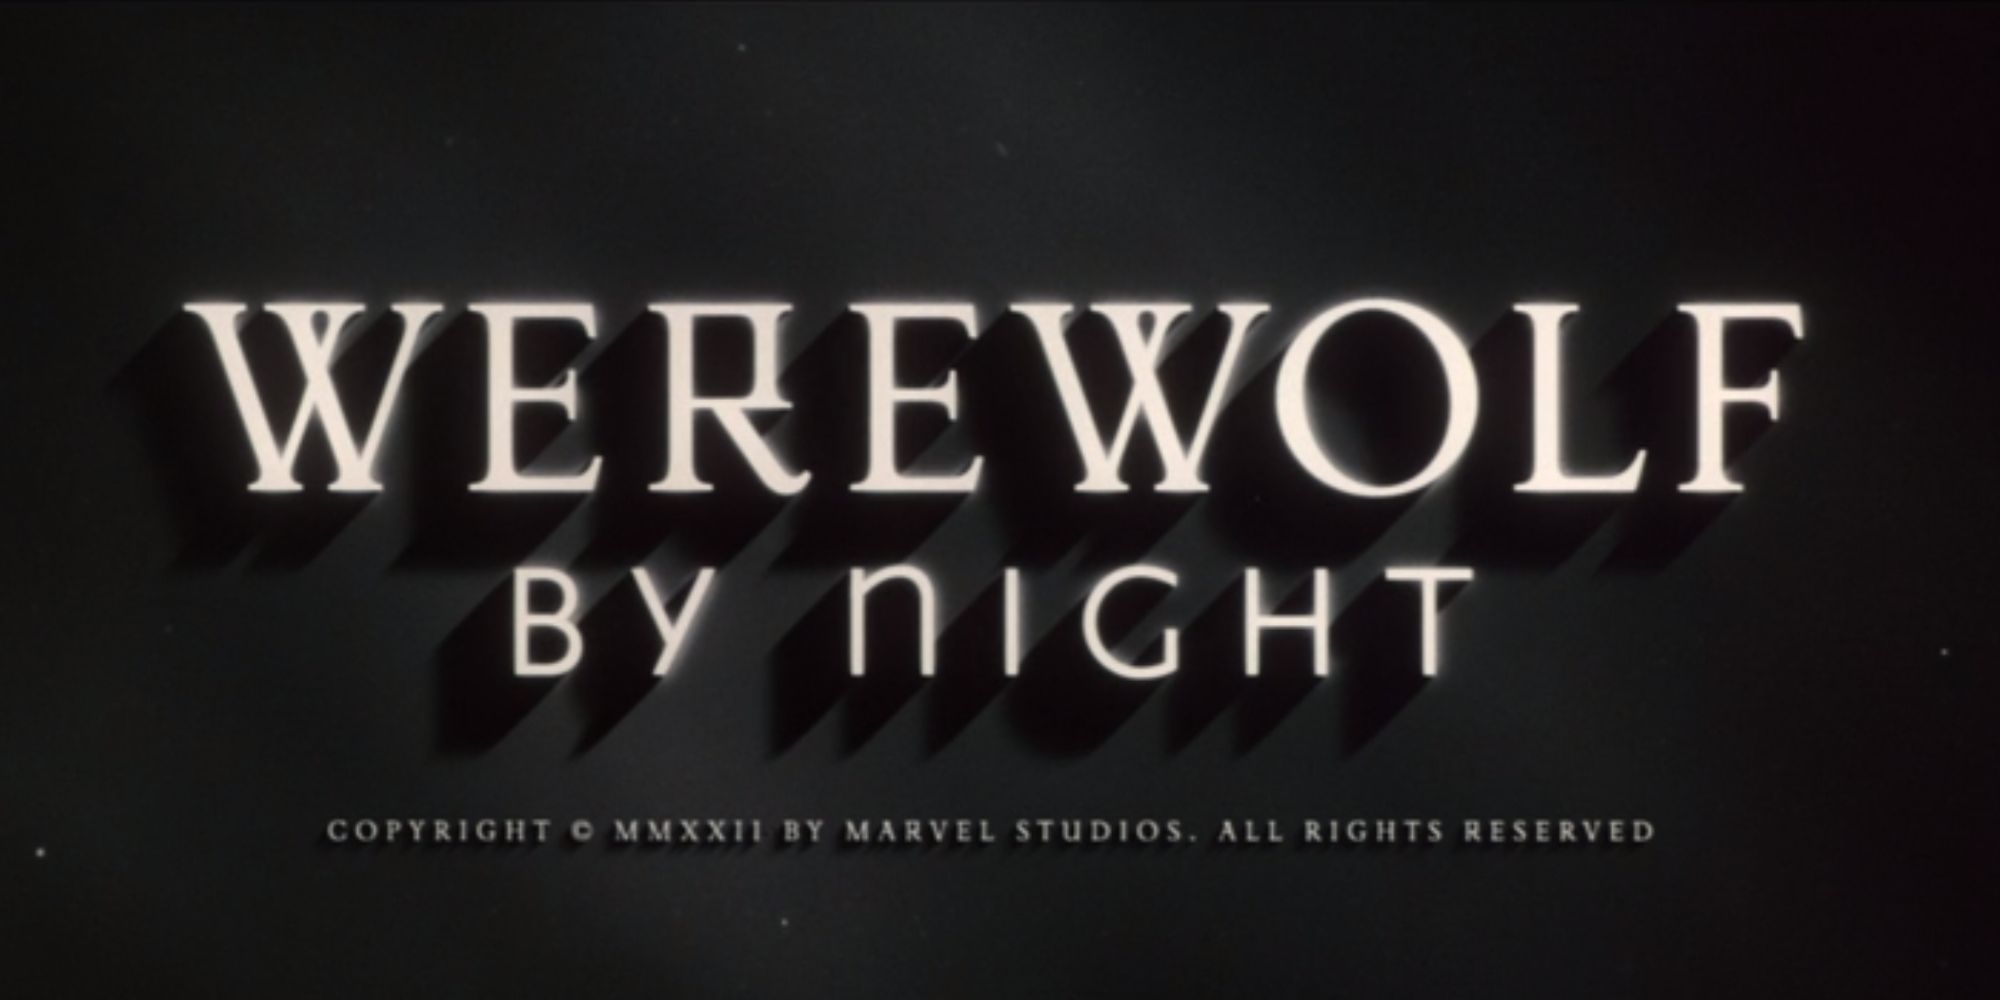 The opening title card for Werewolf By Night